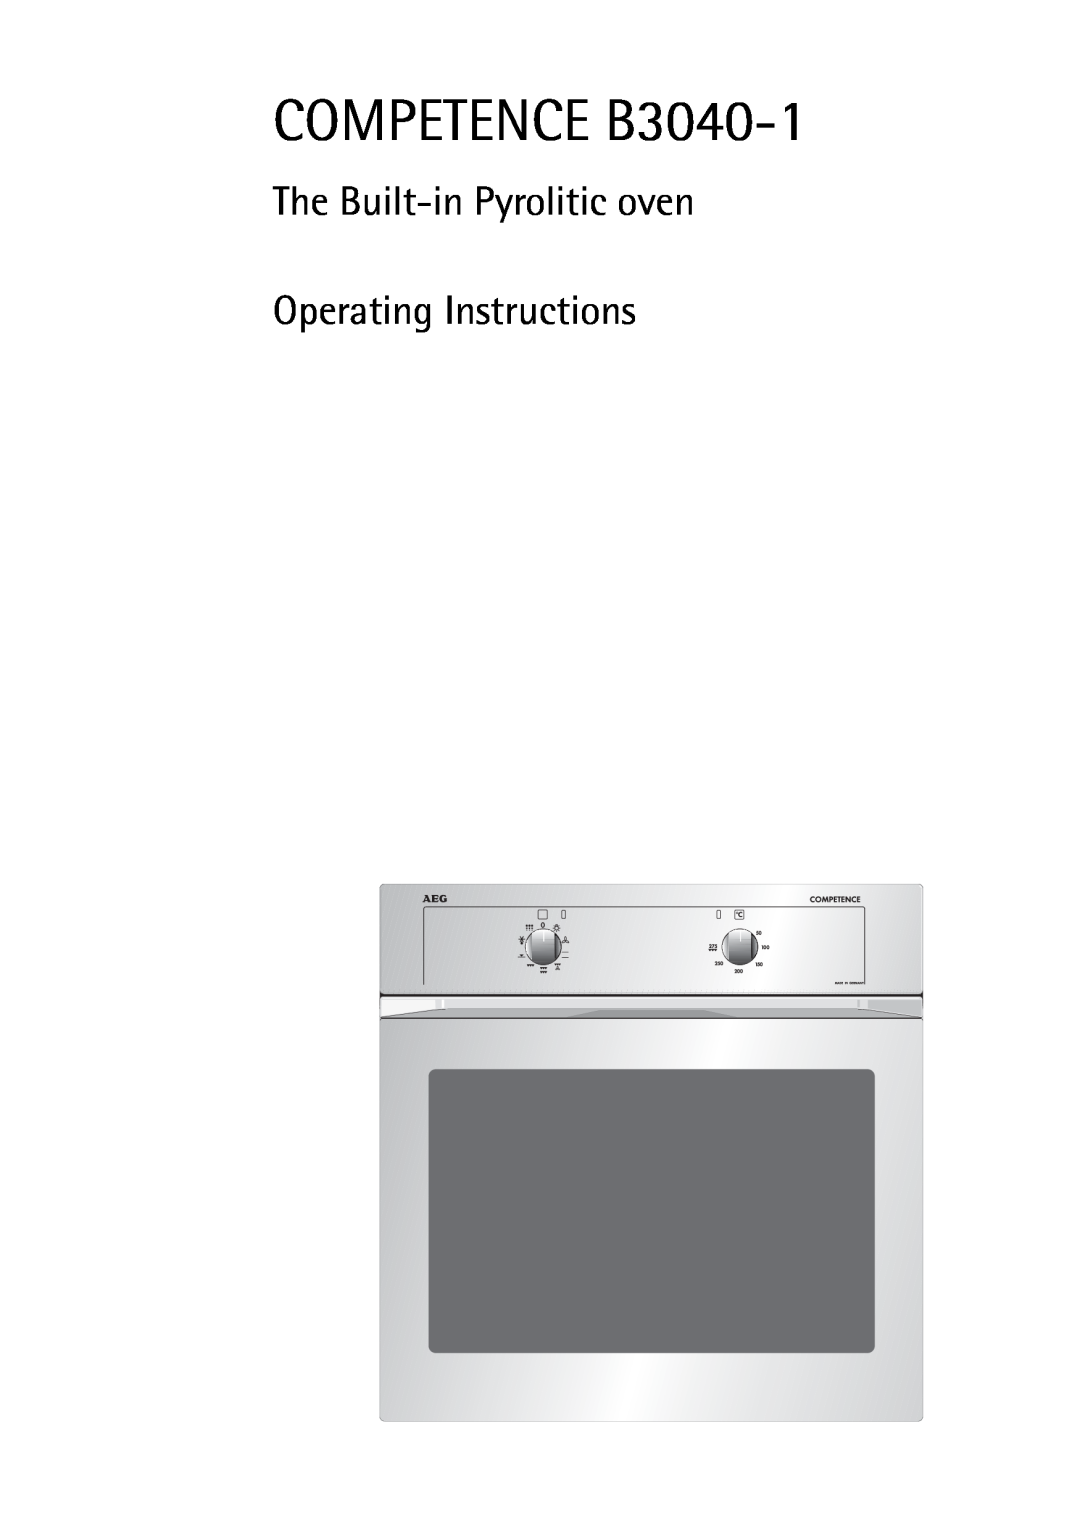 AEG manual The Built-inPyrolitic oven Operating Instructions, COMPETENCE B3040-1 